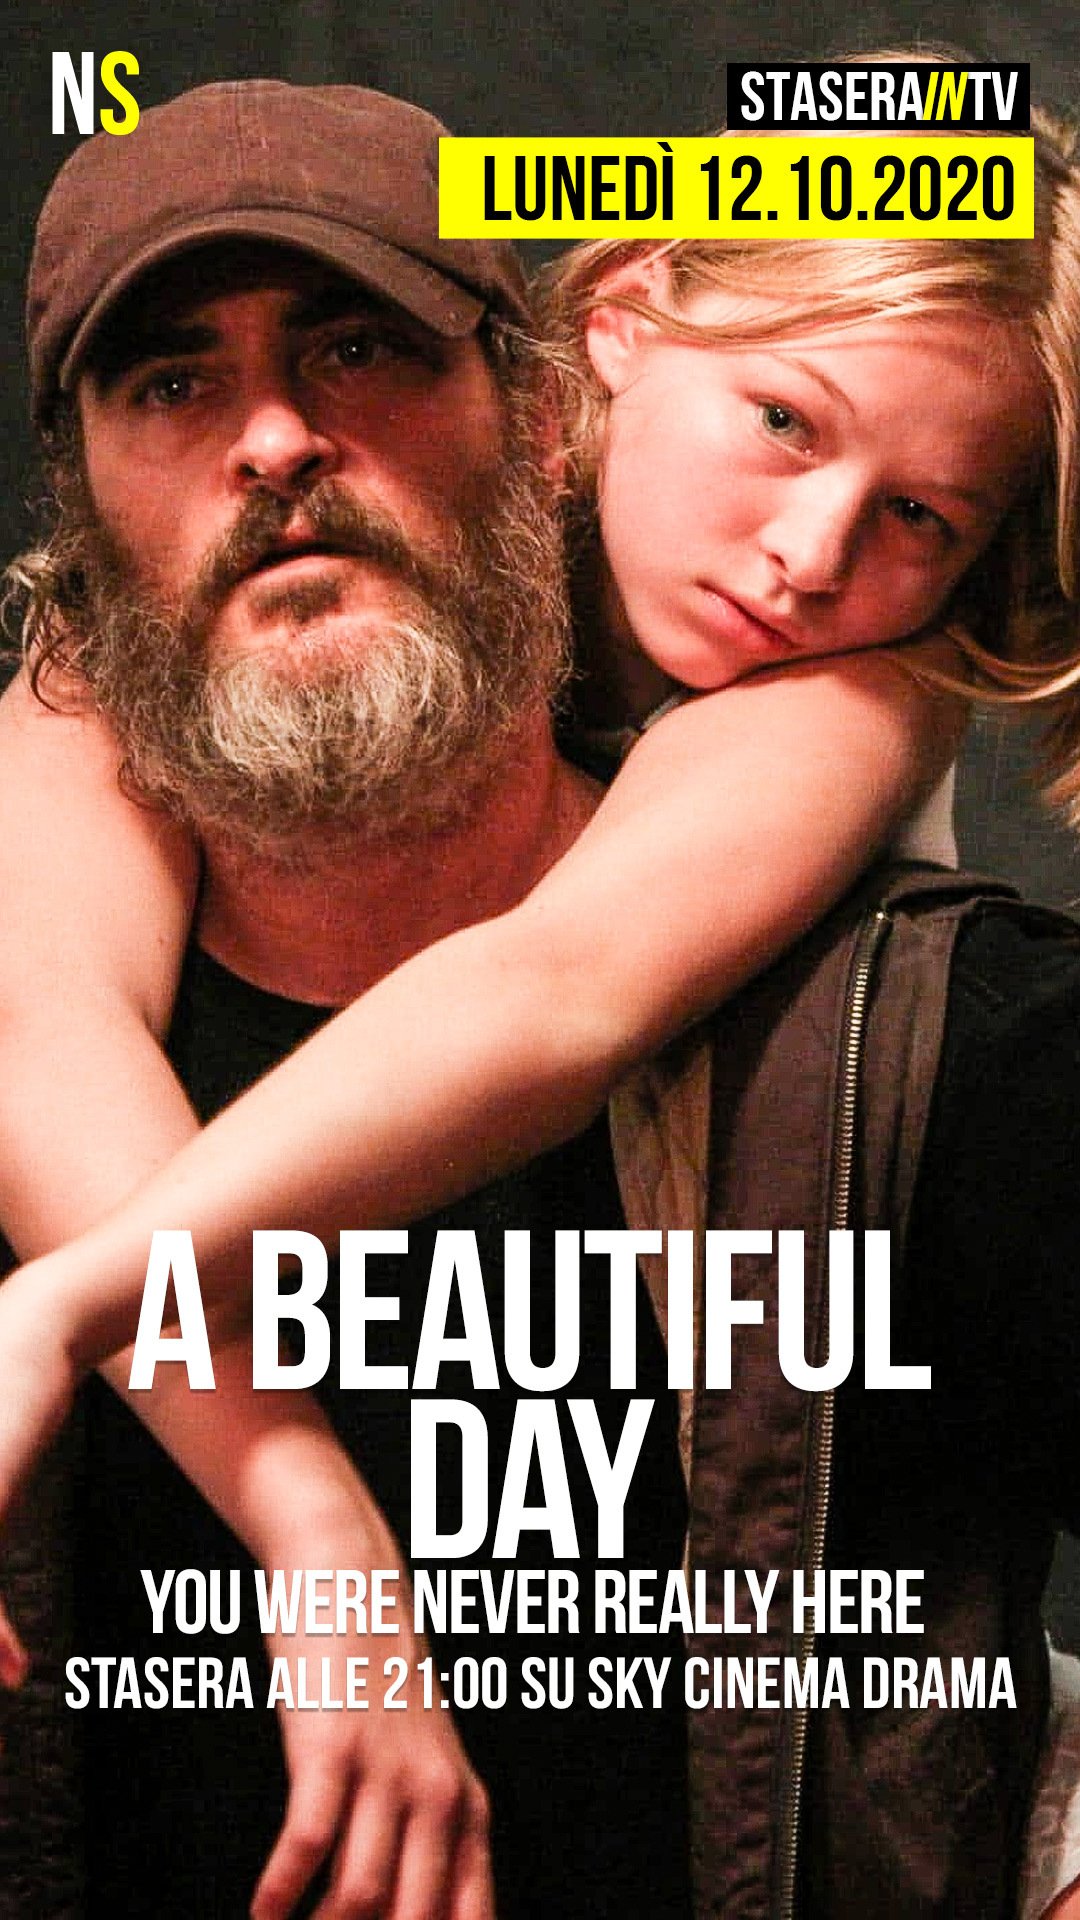 A Beautiful Day - You Were Never Really Here (2017) alle 21:00 su Sky Cinema Drama